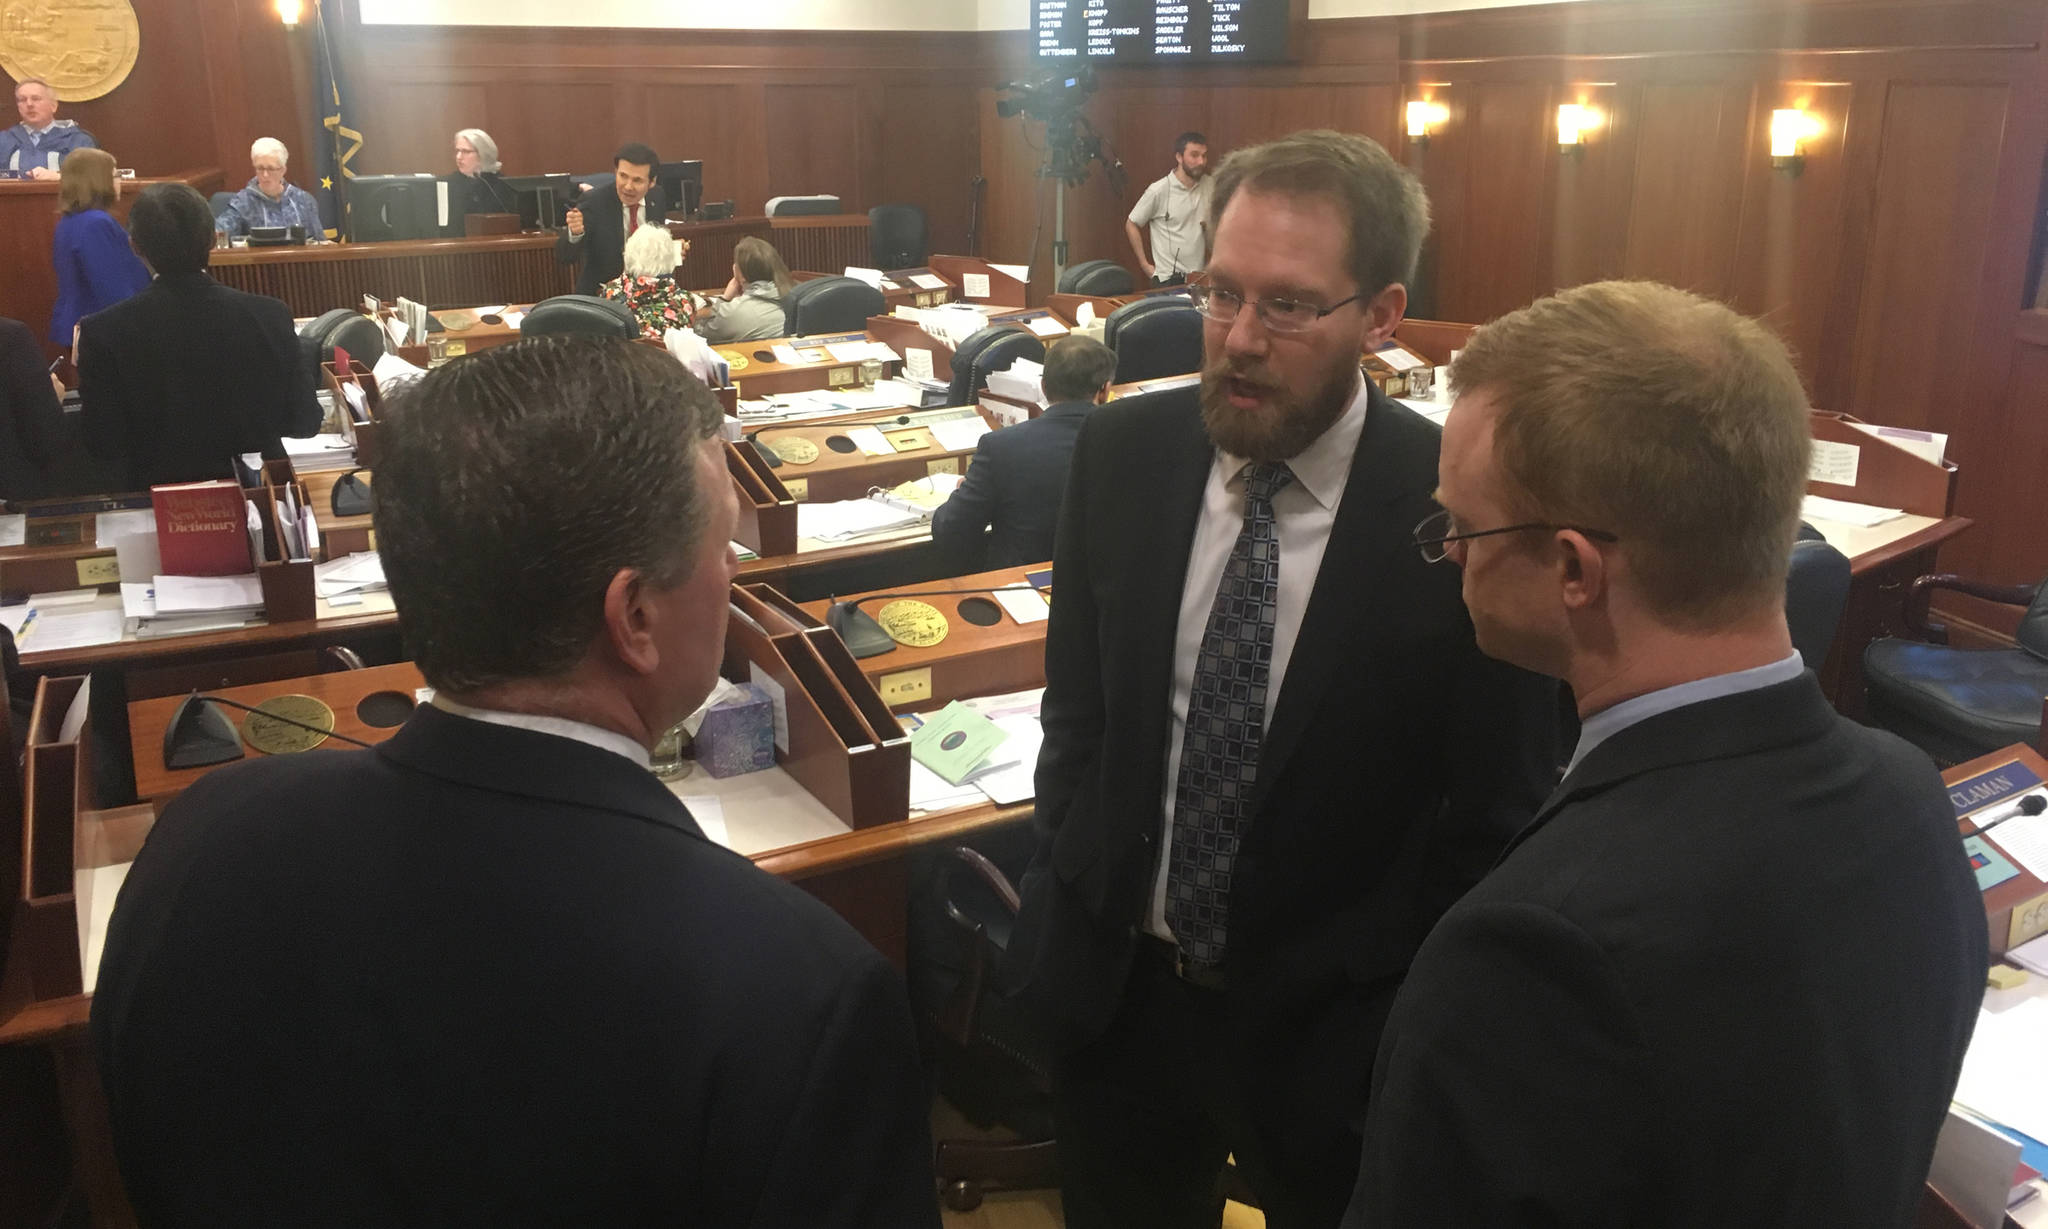 Rep. Lance Pruitt, R-Anchorage, center, talks to Rep. Chuck Kopp, R-Anchorage, left, and Rep. David Eastman, R-Wasilla during a break in the floor session Friday, March 30, 2018. (James Brooks | Juneau Empire)